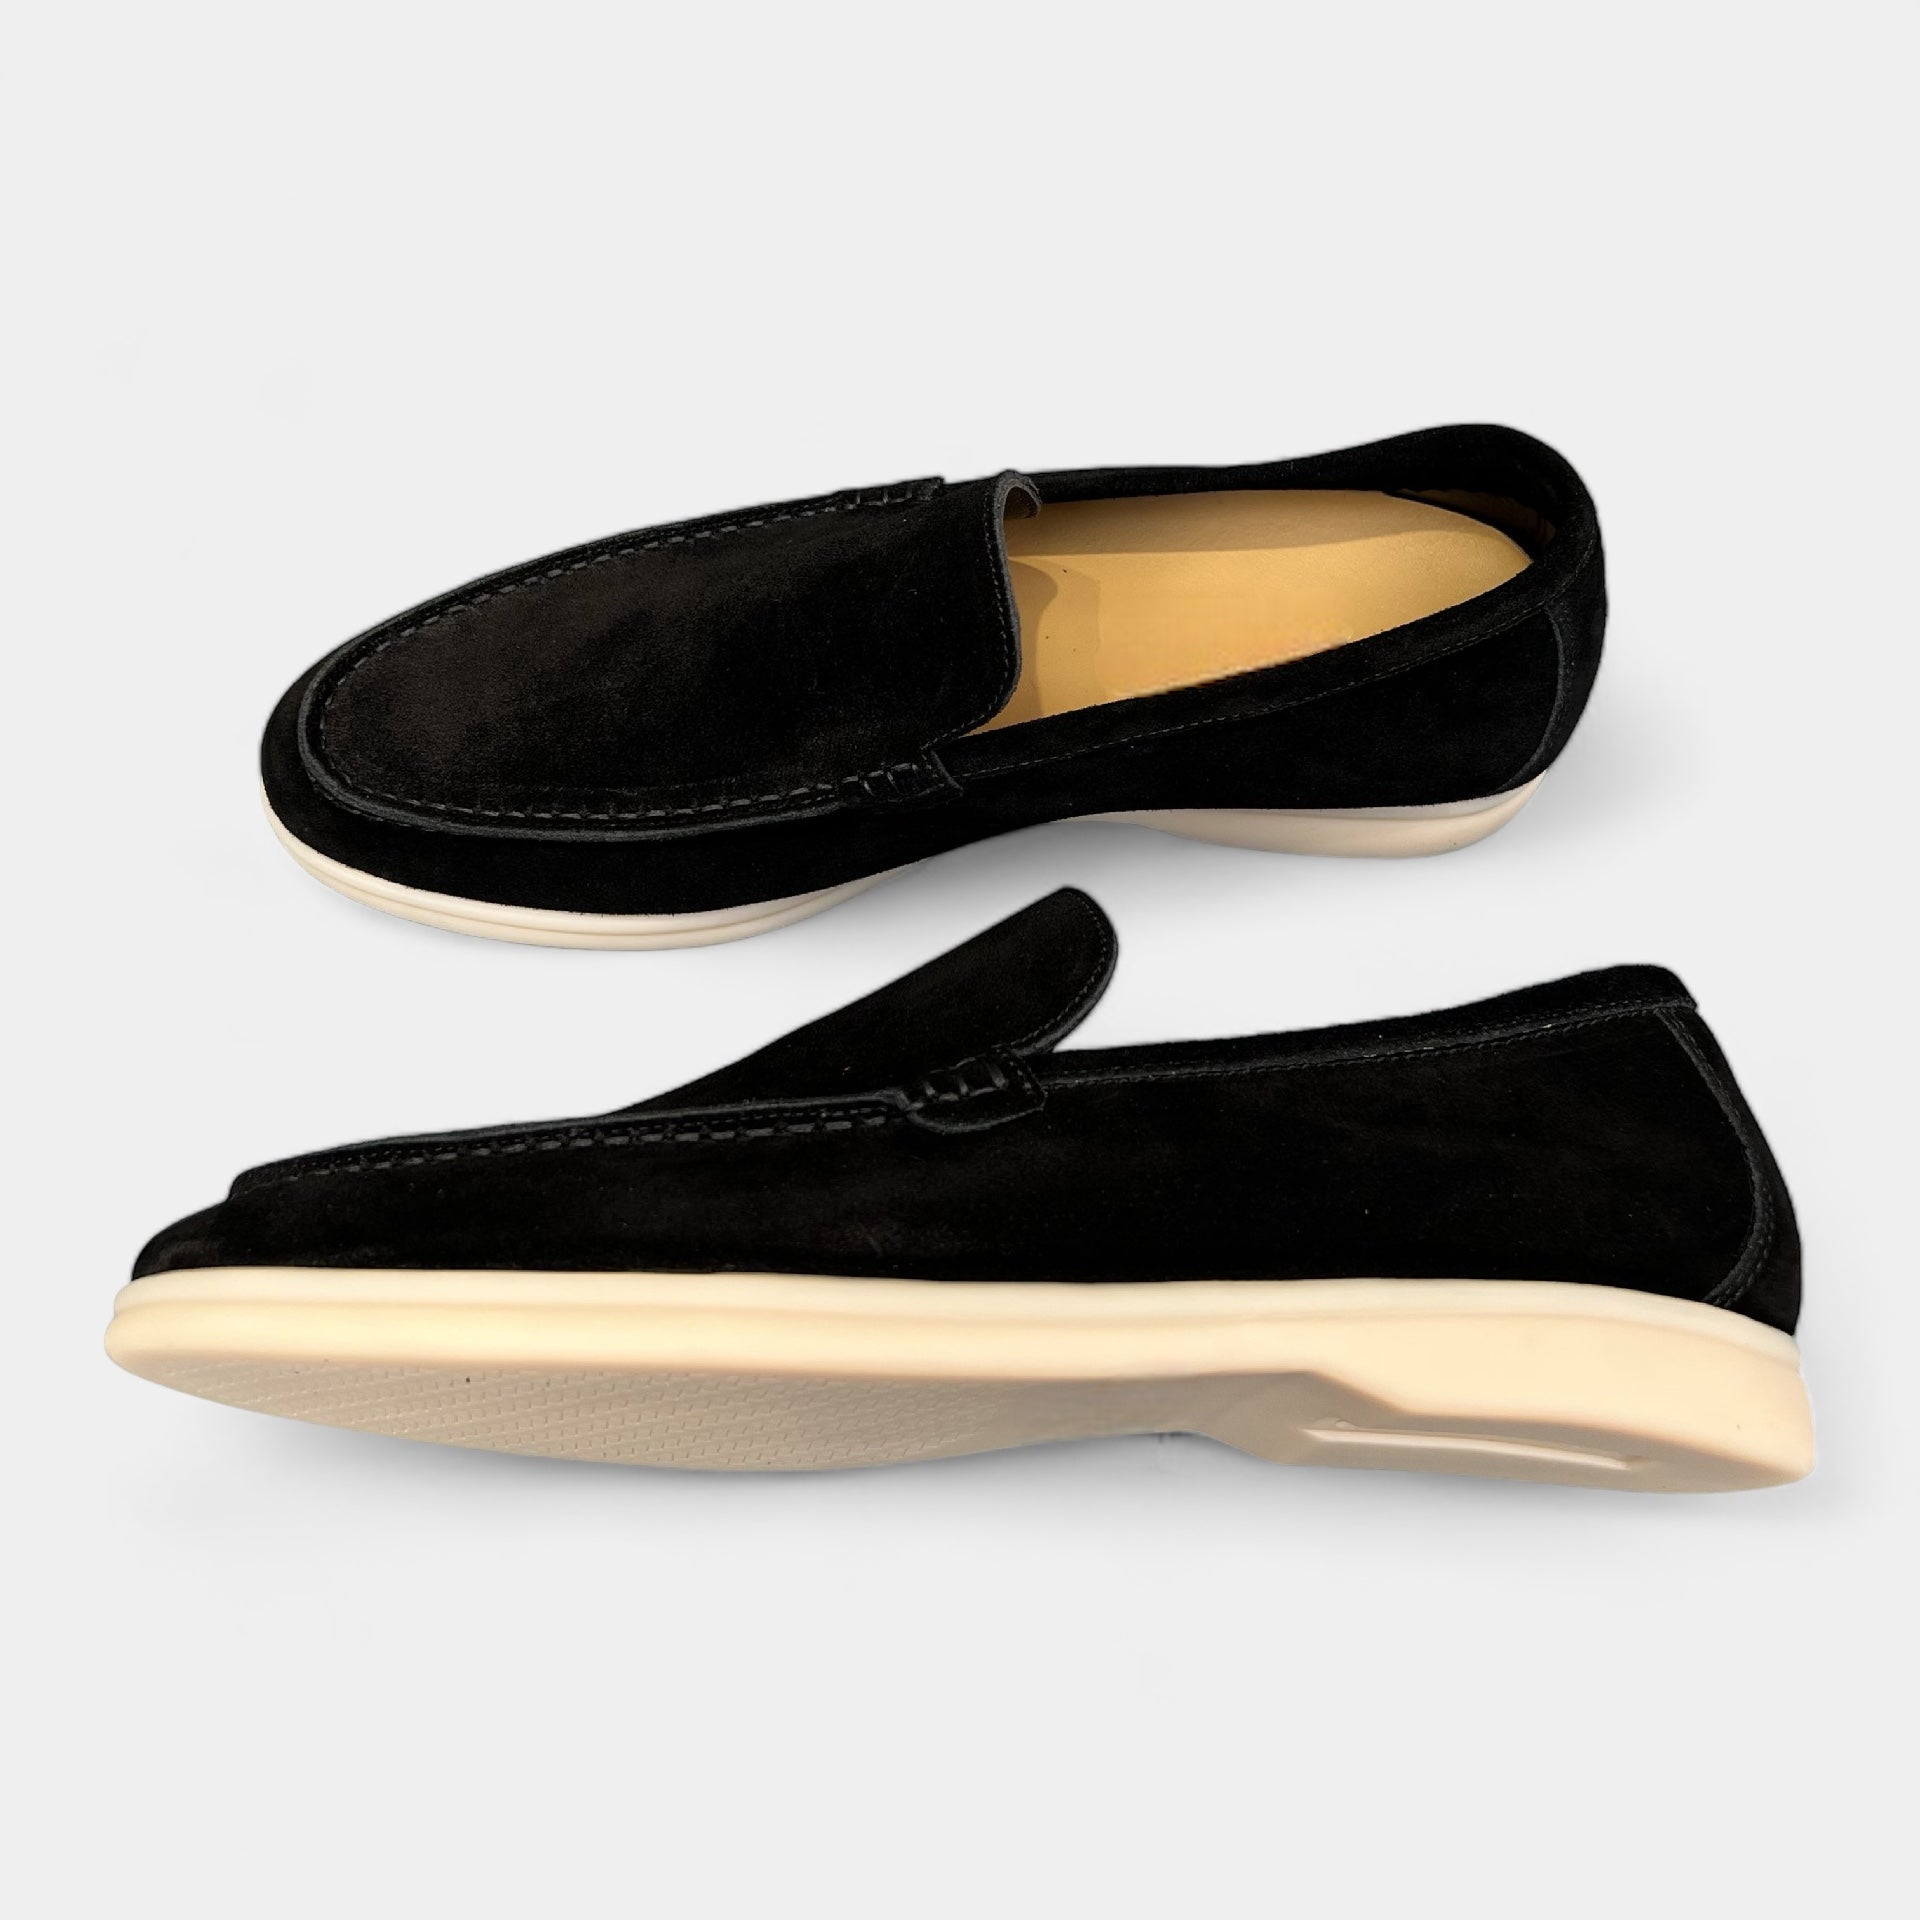 OLD MONEY SUEDE Loafers